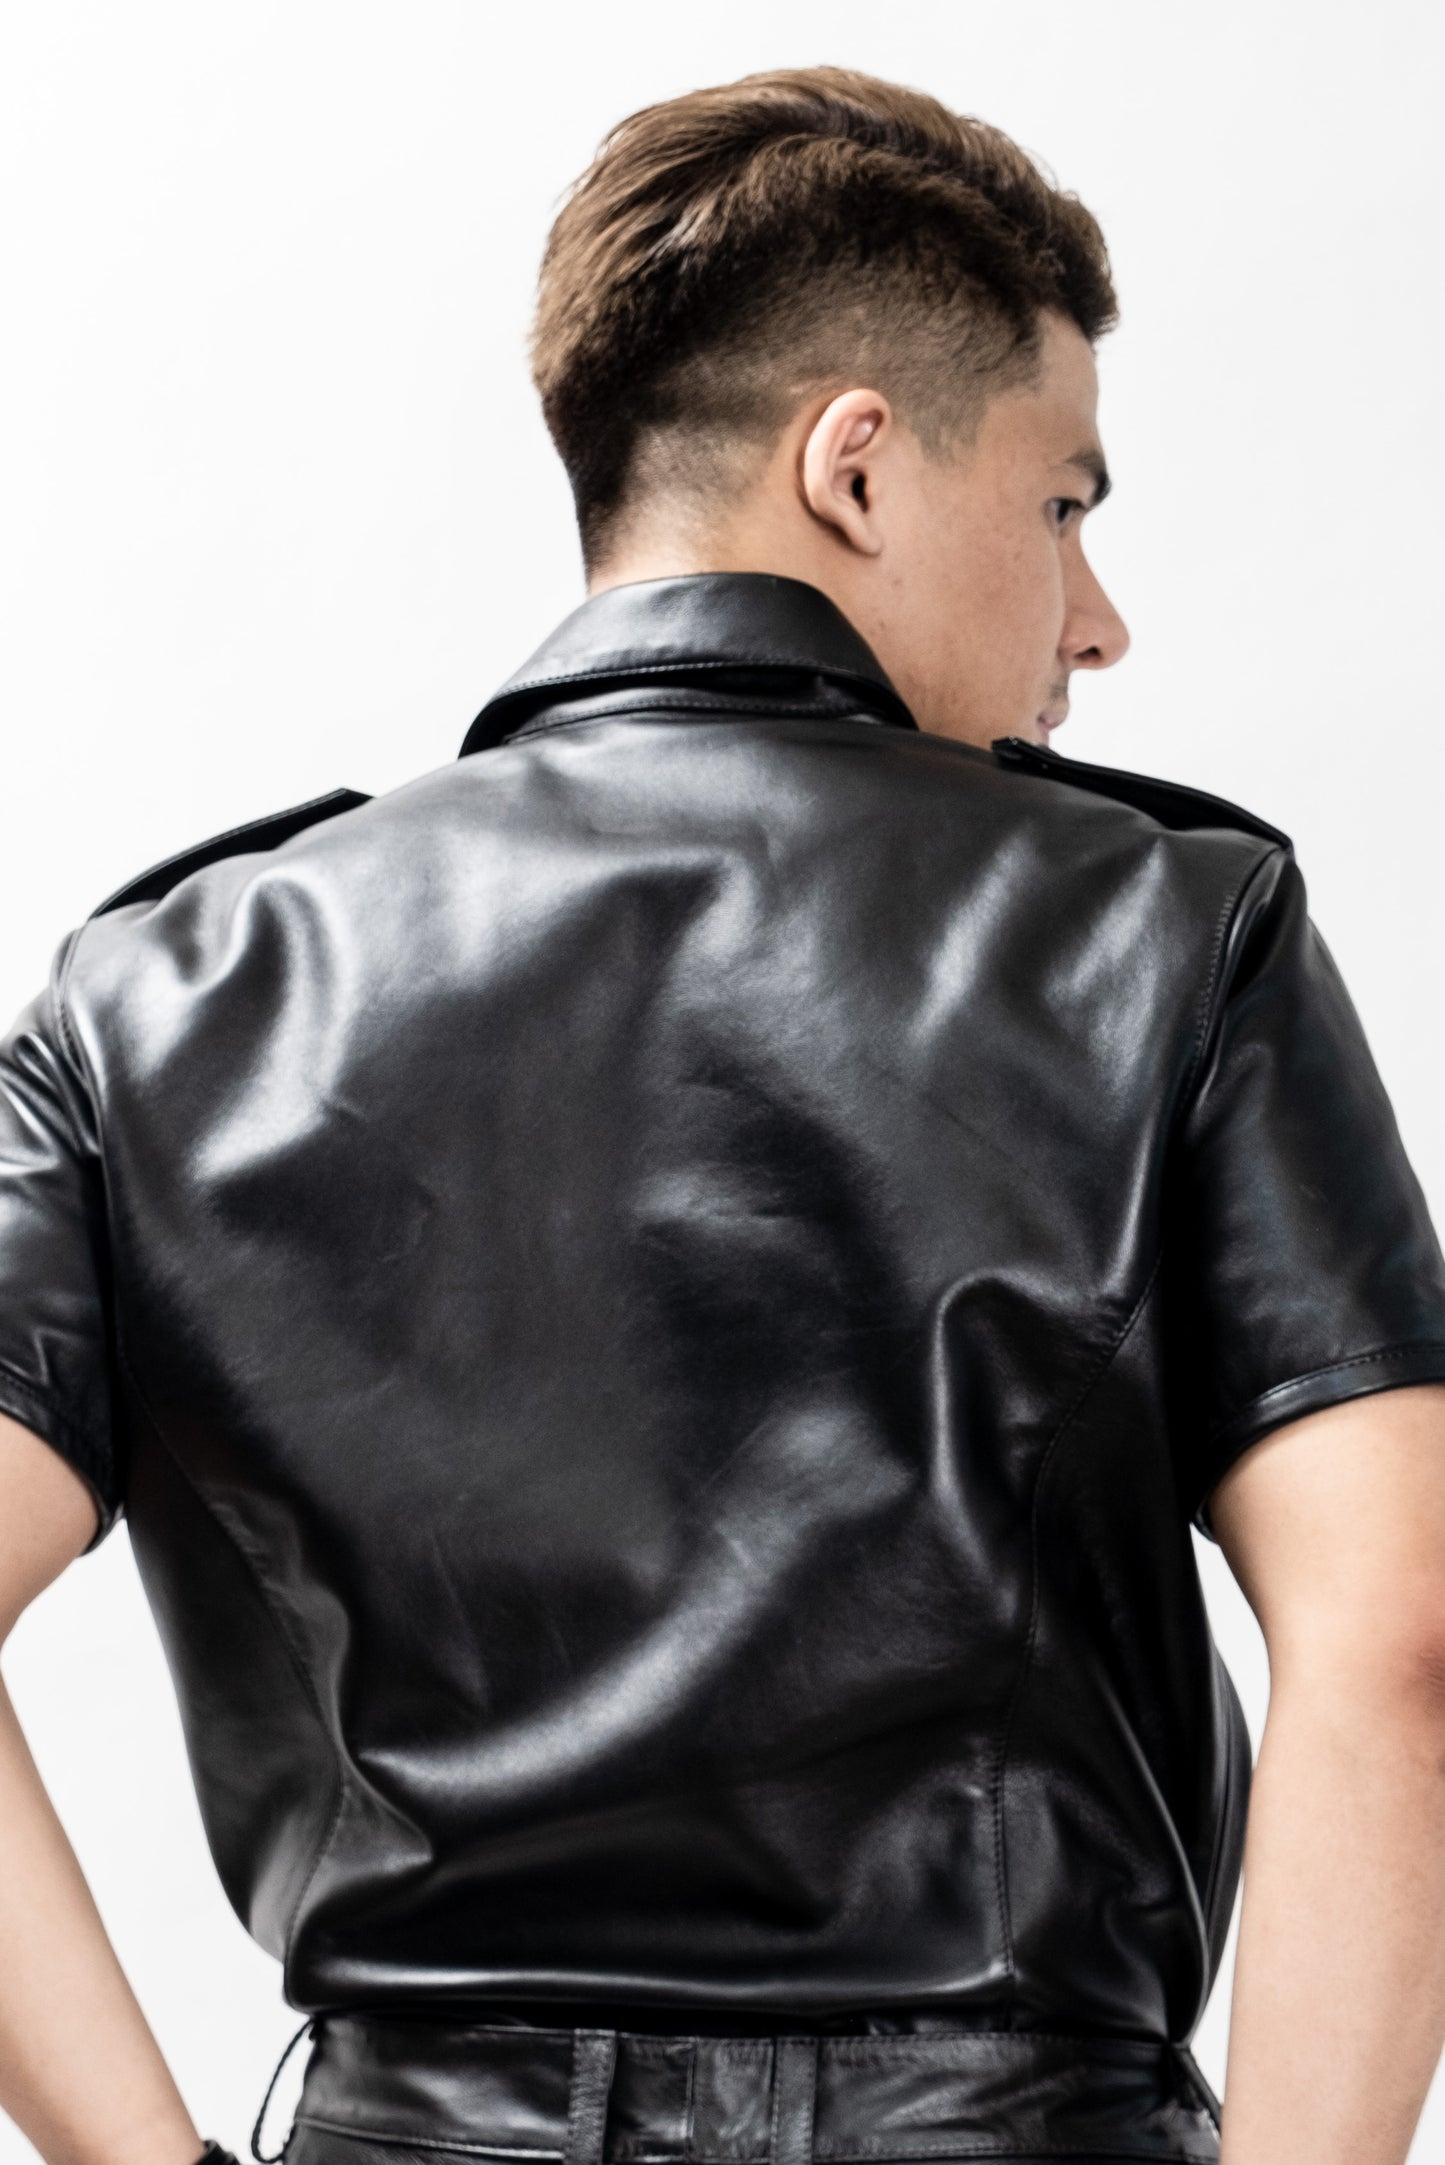 Leather Classic Shirt